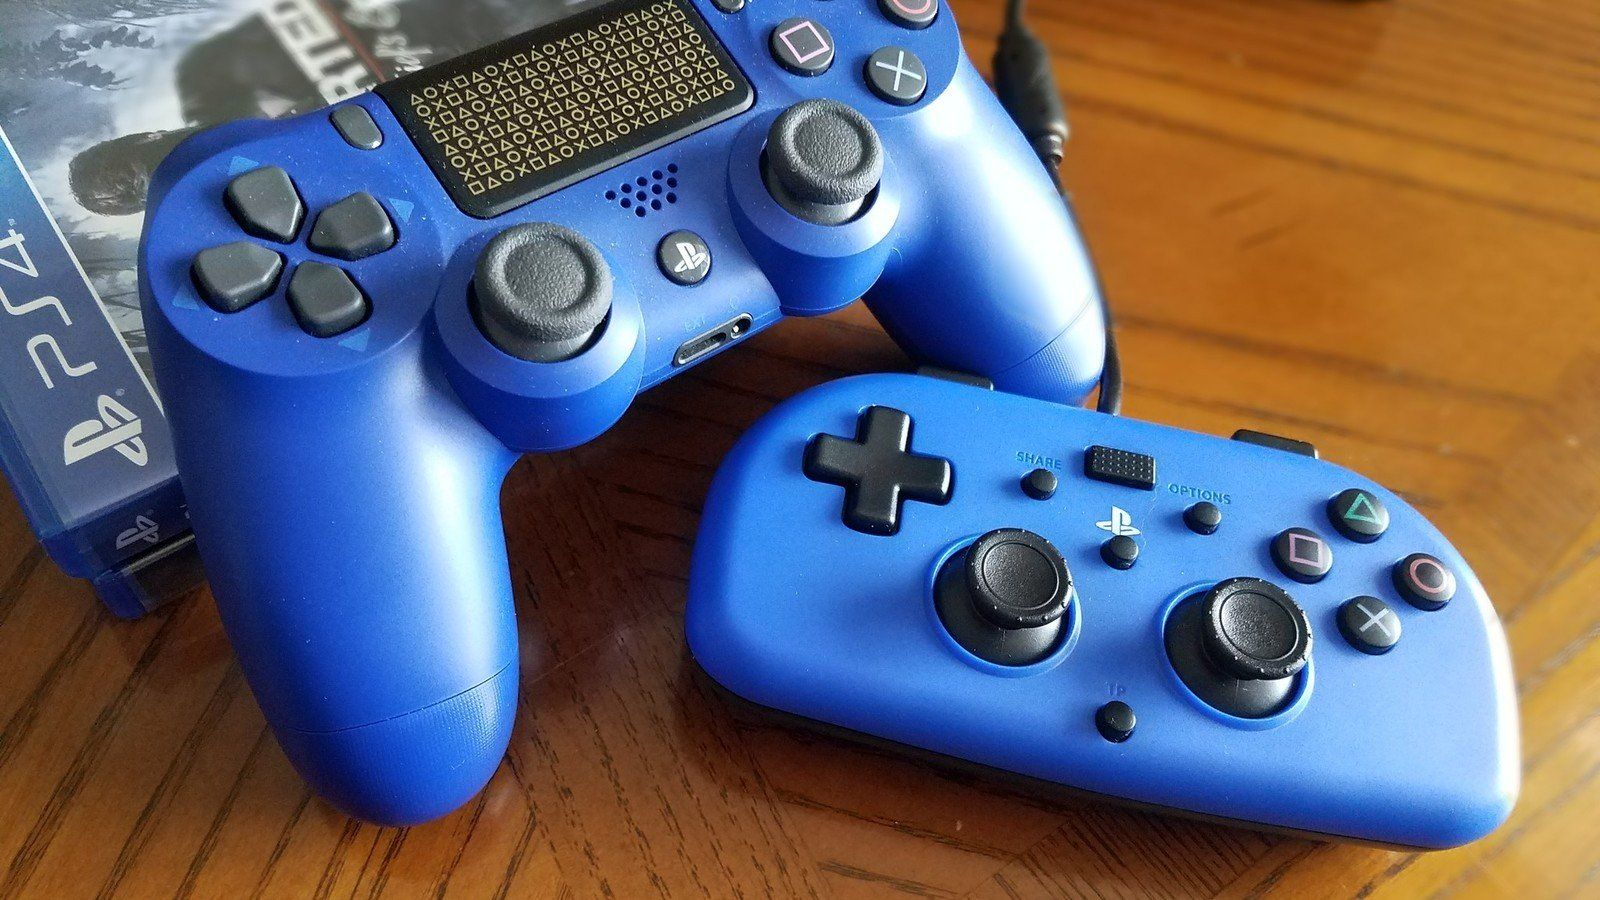 Every color PS4 controller you can buy today in 2020